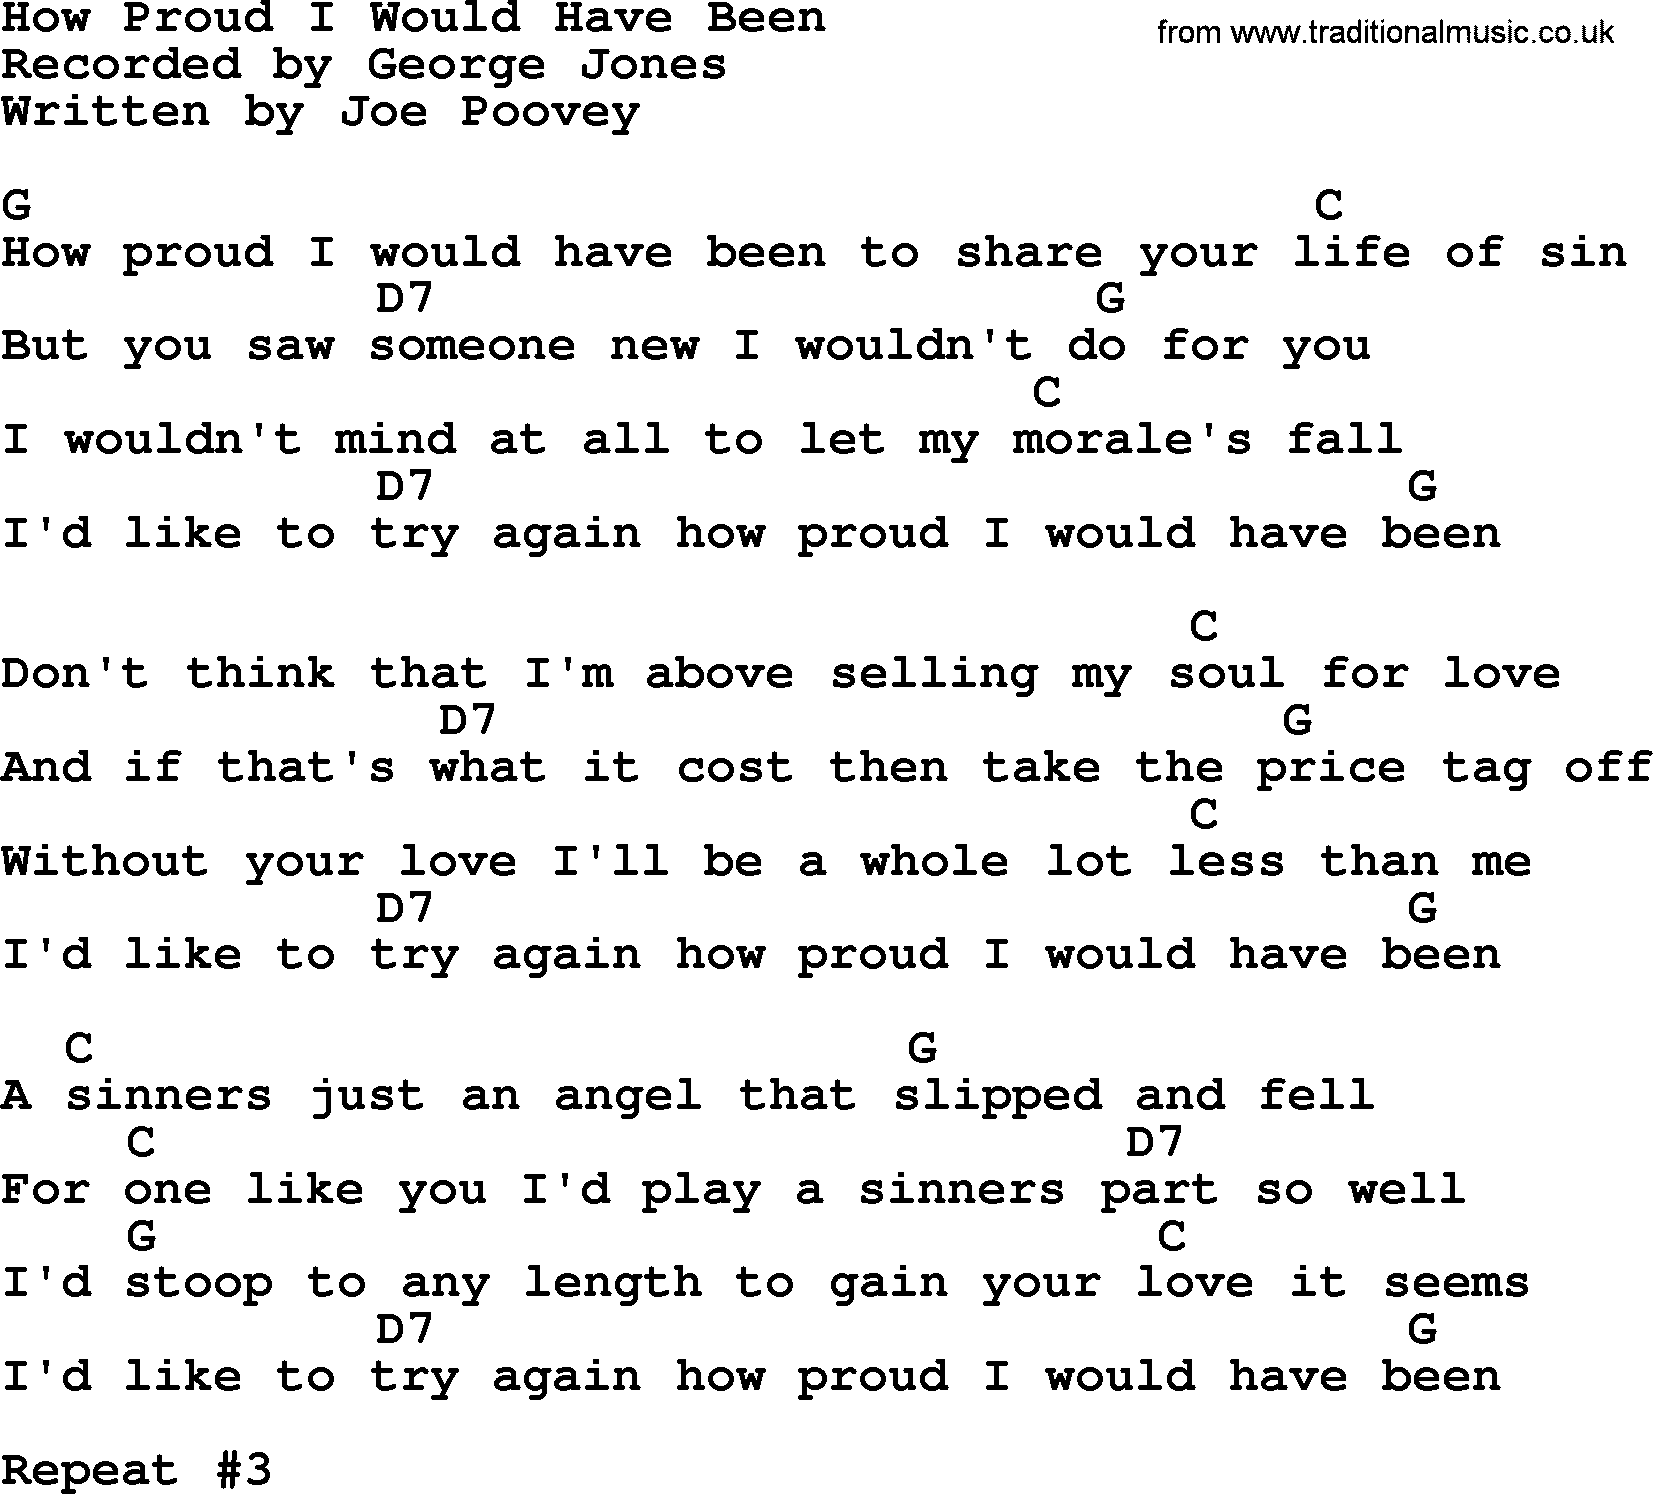 George Jones song: How Proud I Would Have Been, lyrics and chords